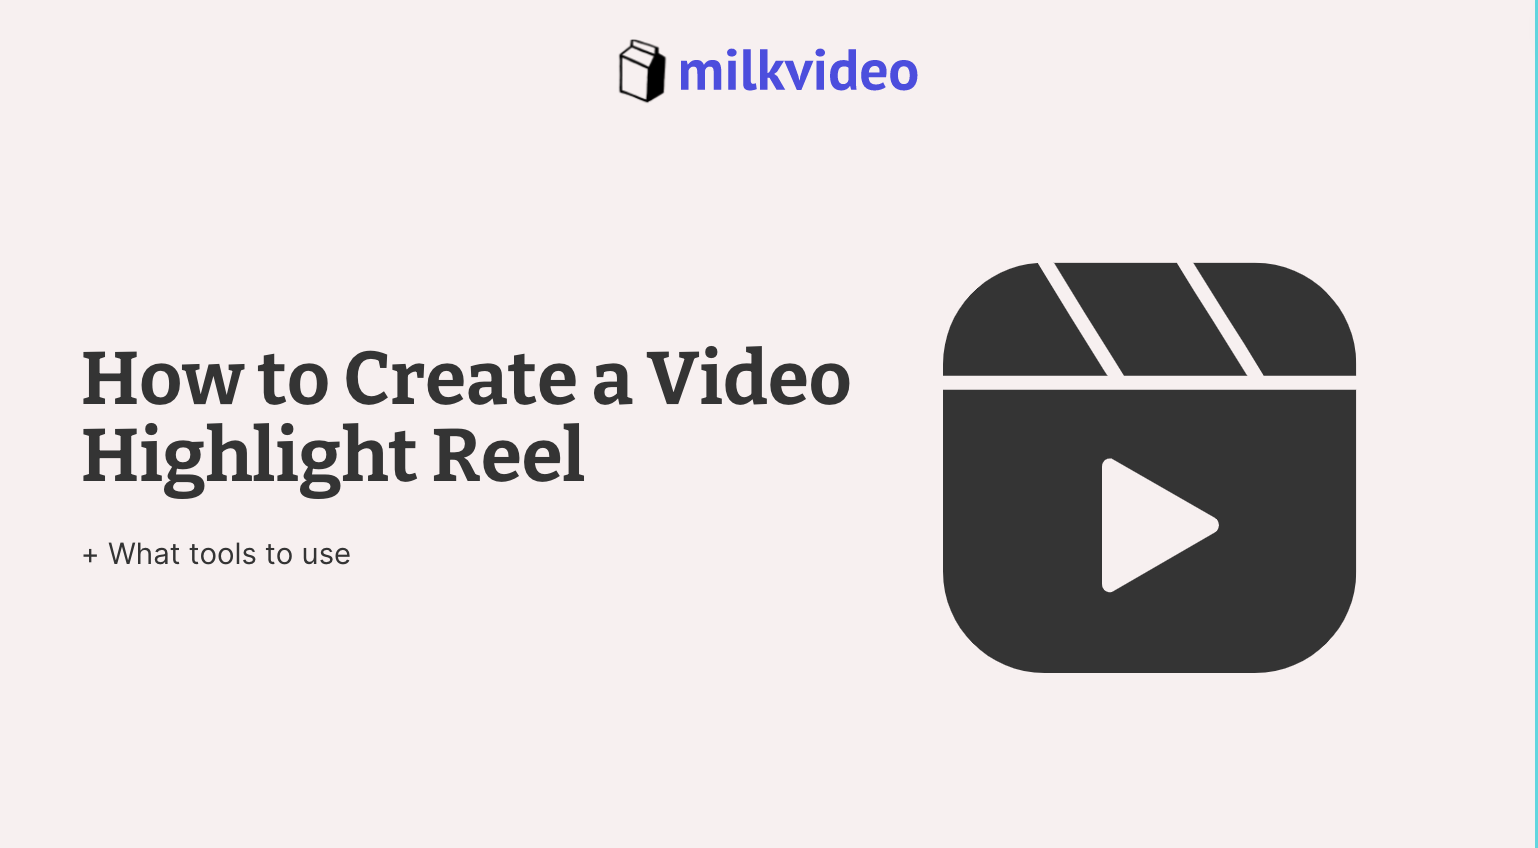 How to Create a Video Highlight Reel